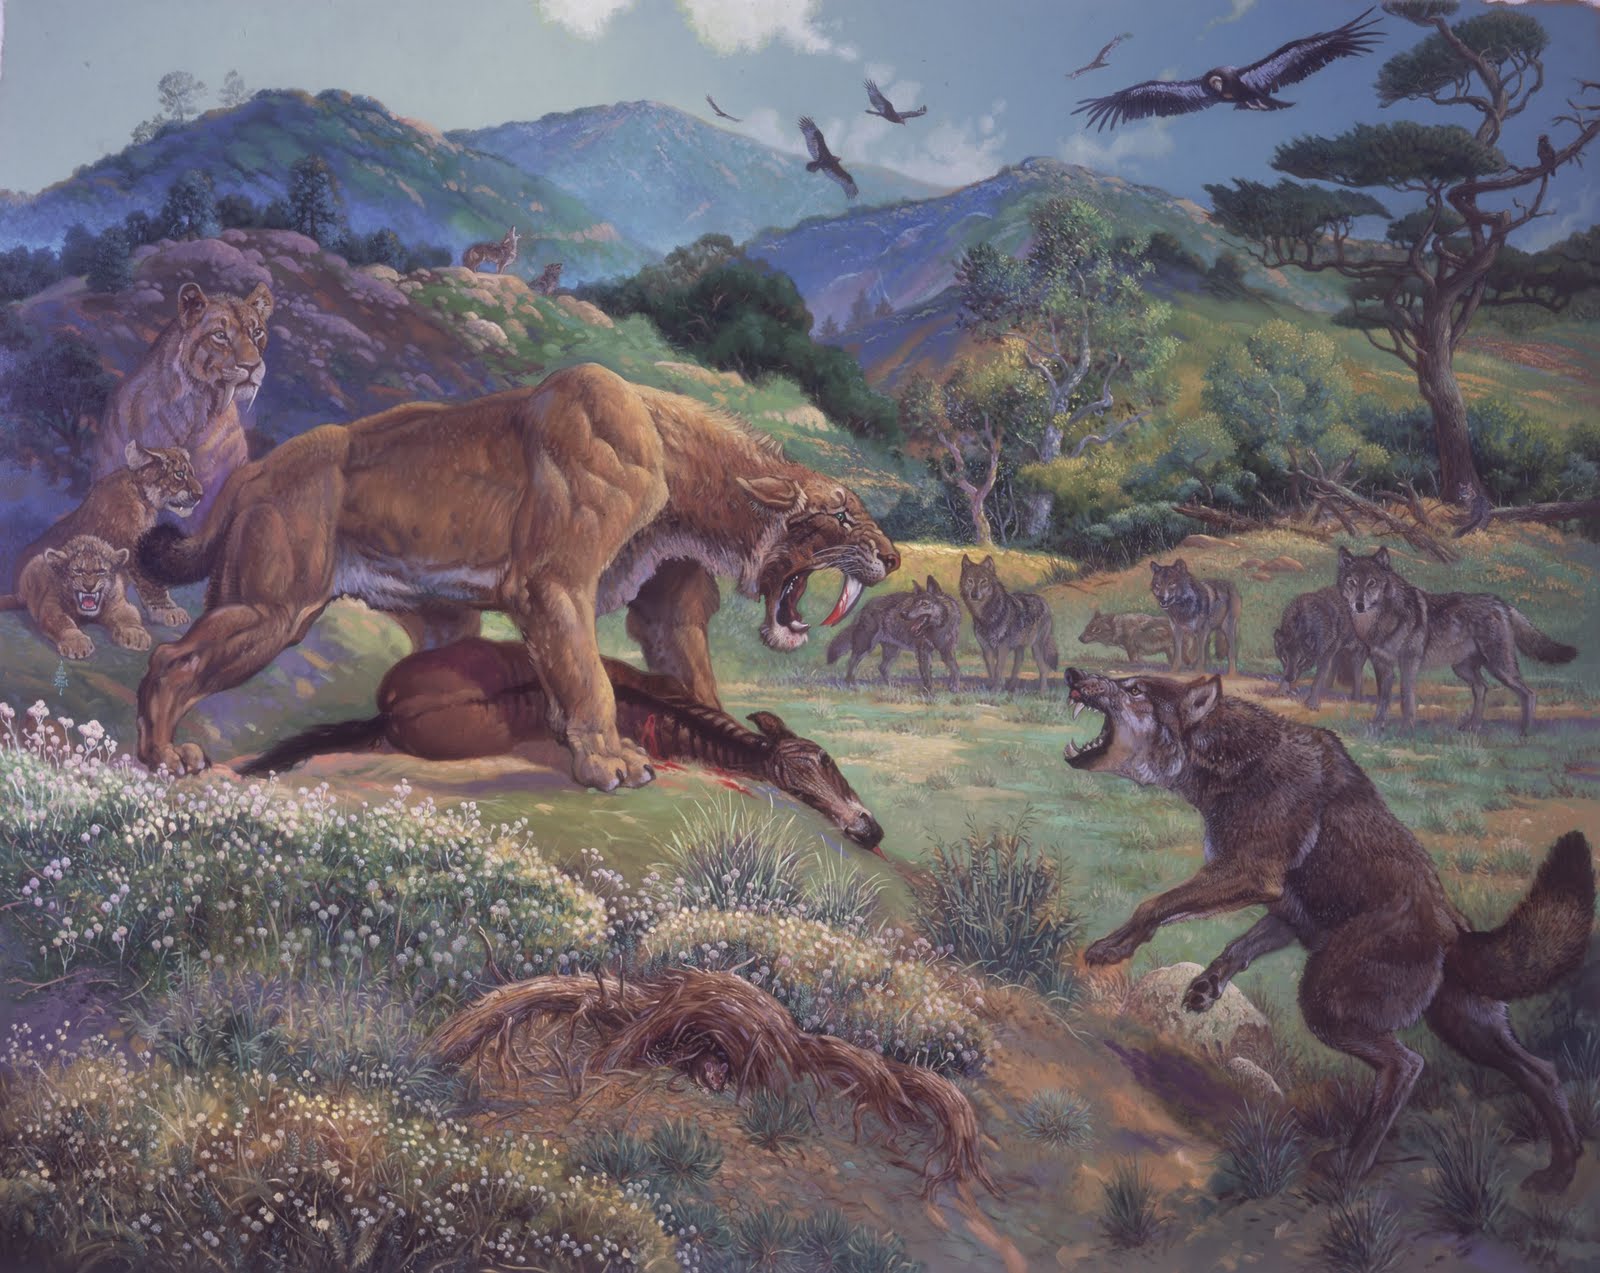 Saber Tooth Tiger Vs Dire Wolf Wallpaper